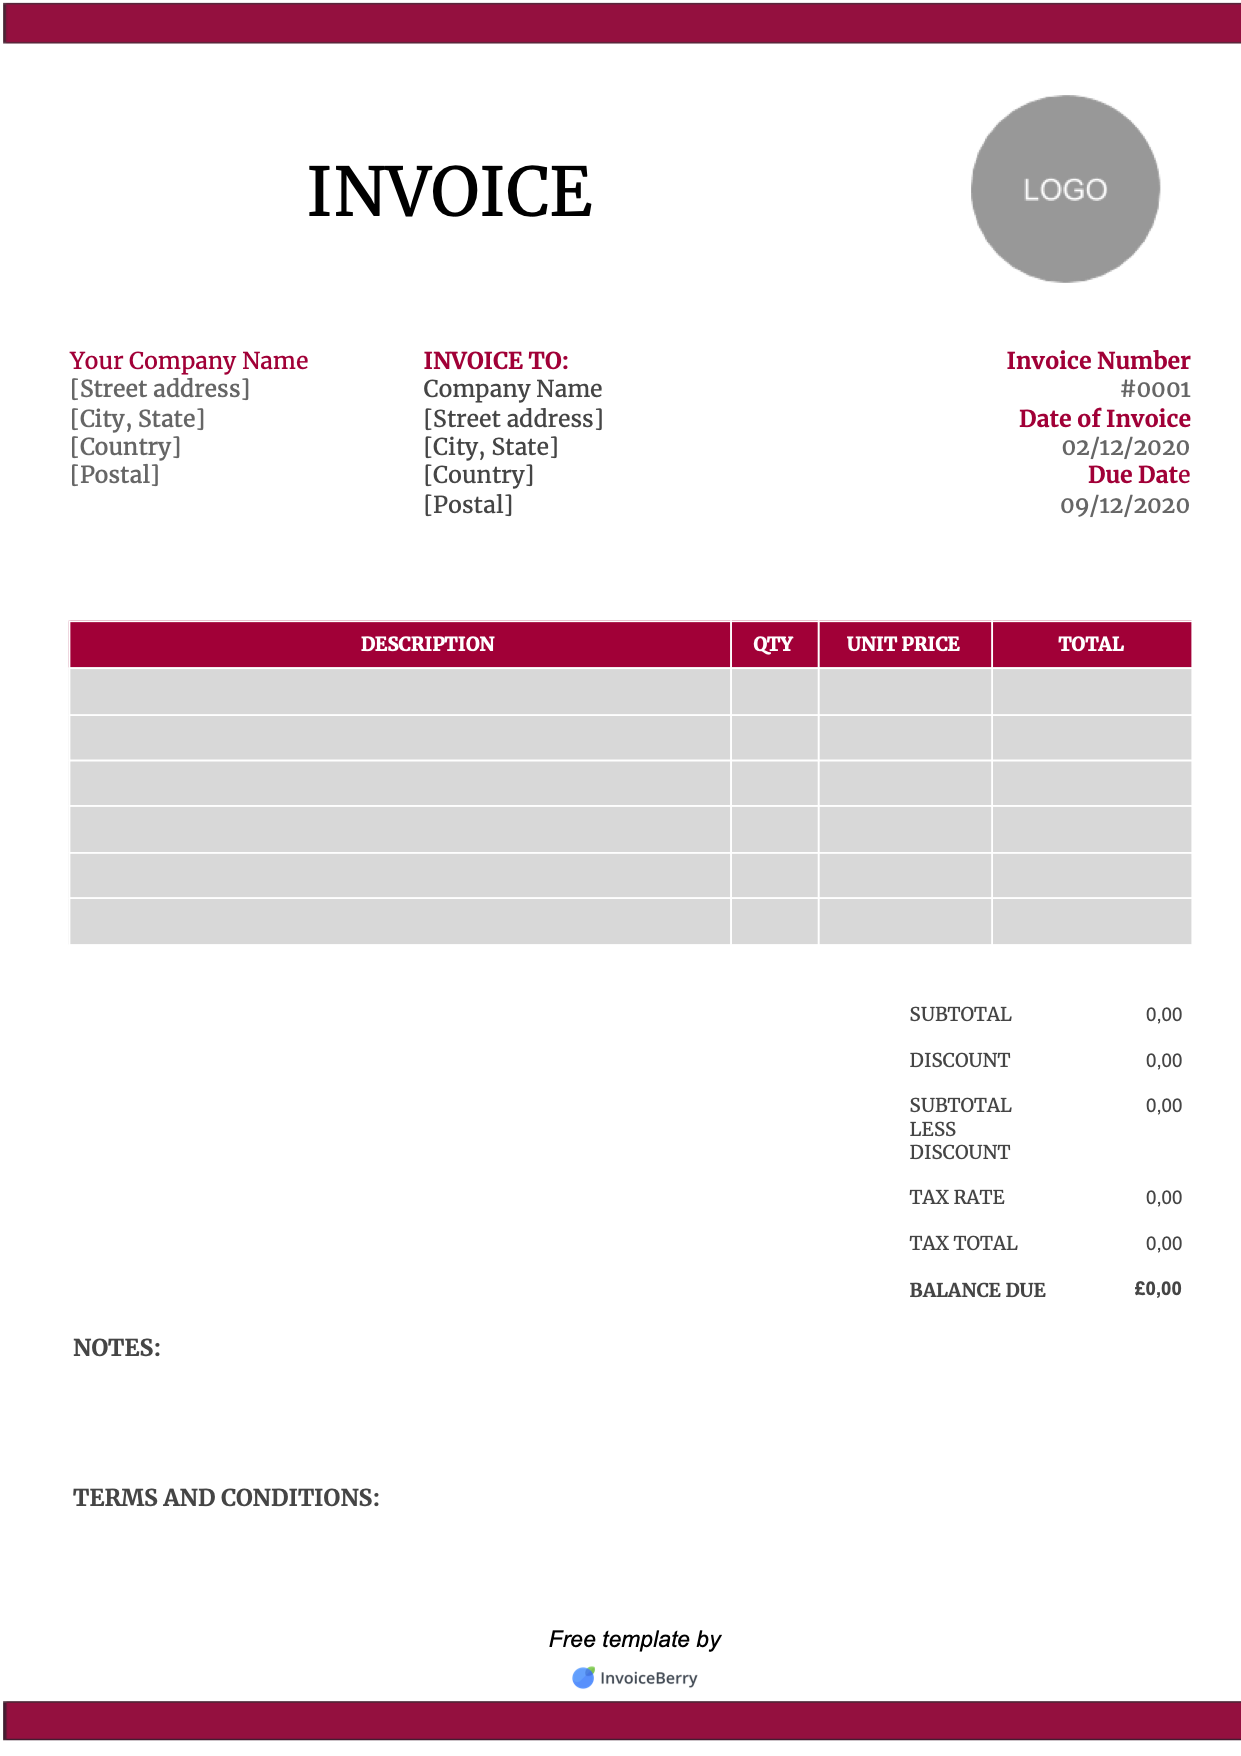 Free UK Invoice Template Sample #24 Download  InvoiceBerry Within Business Invoice Template Uk